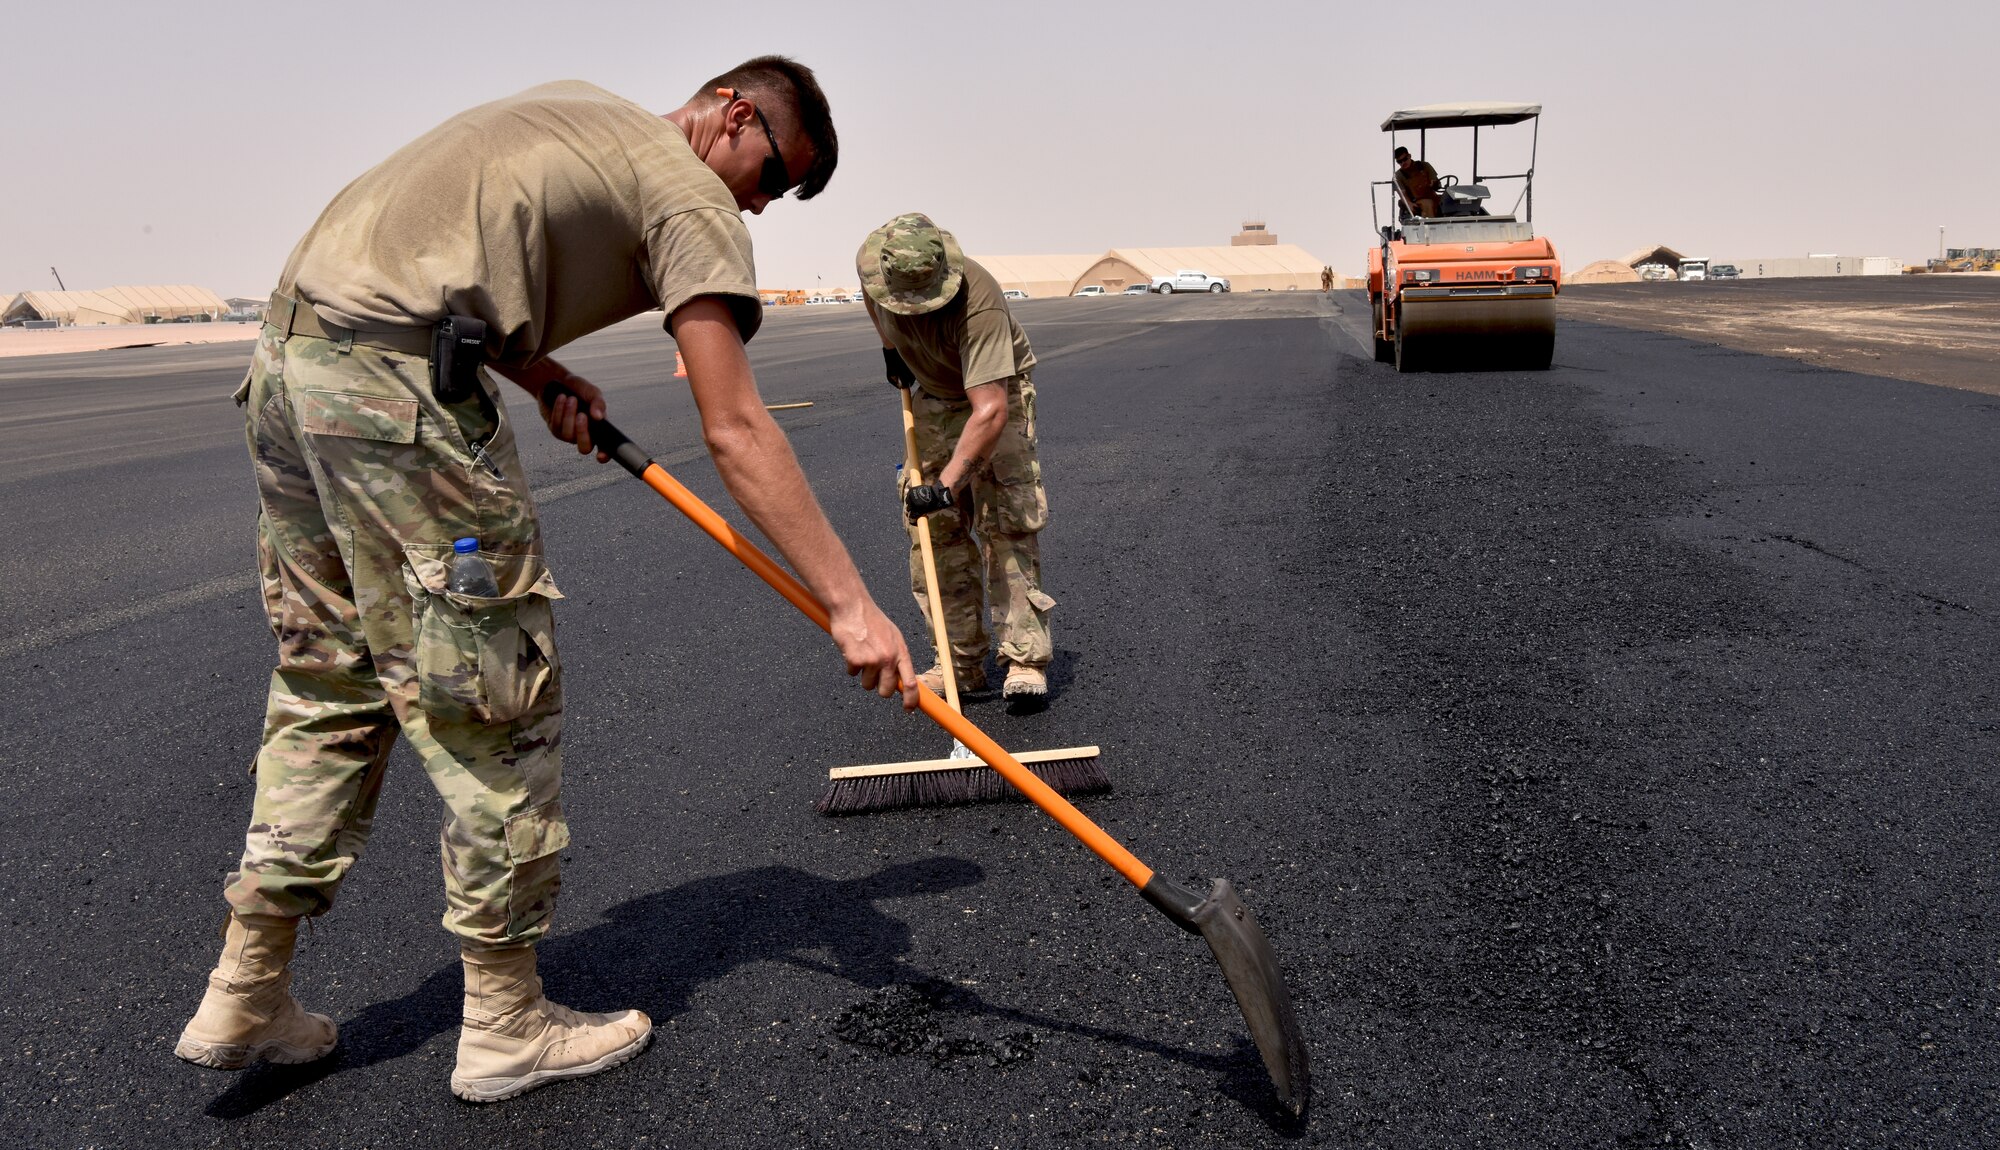 Airmen from the 378th Expeditionary Civil Engineer Squadron Dirt Boys shop work to finish construction on the new helicopter pad at Prince Sultan Air Base, Kingdom of Saudi Arabia.